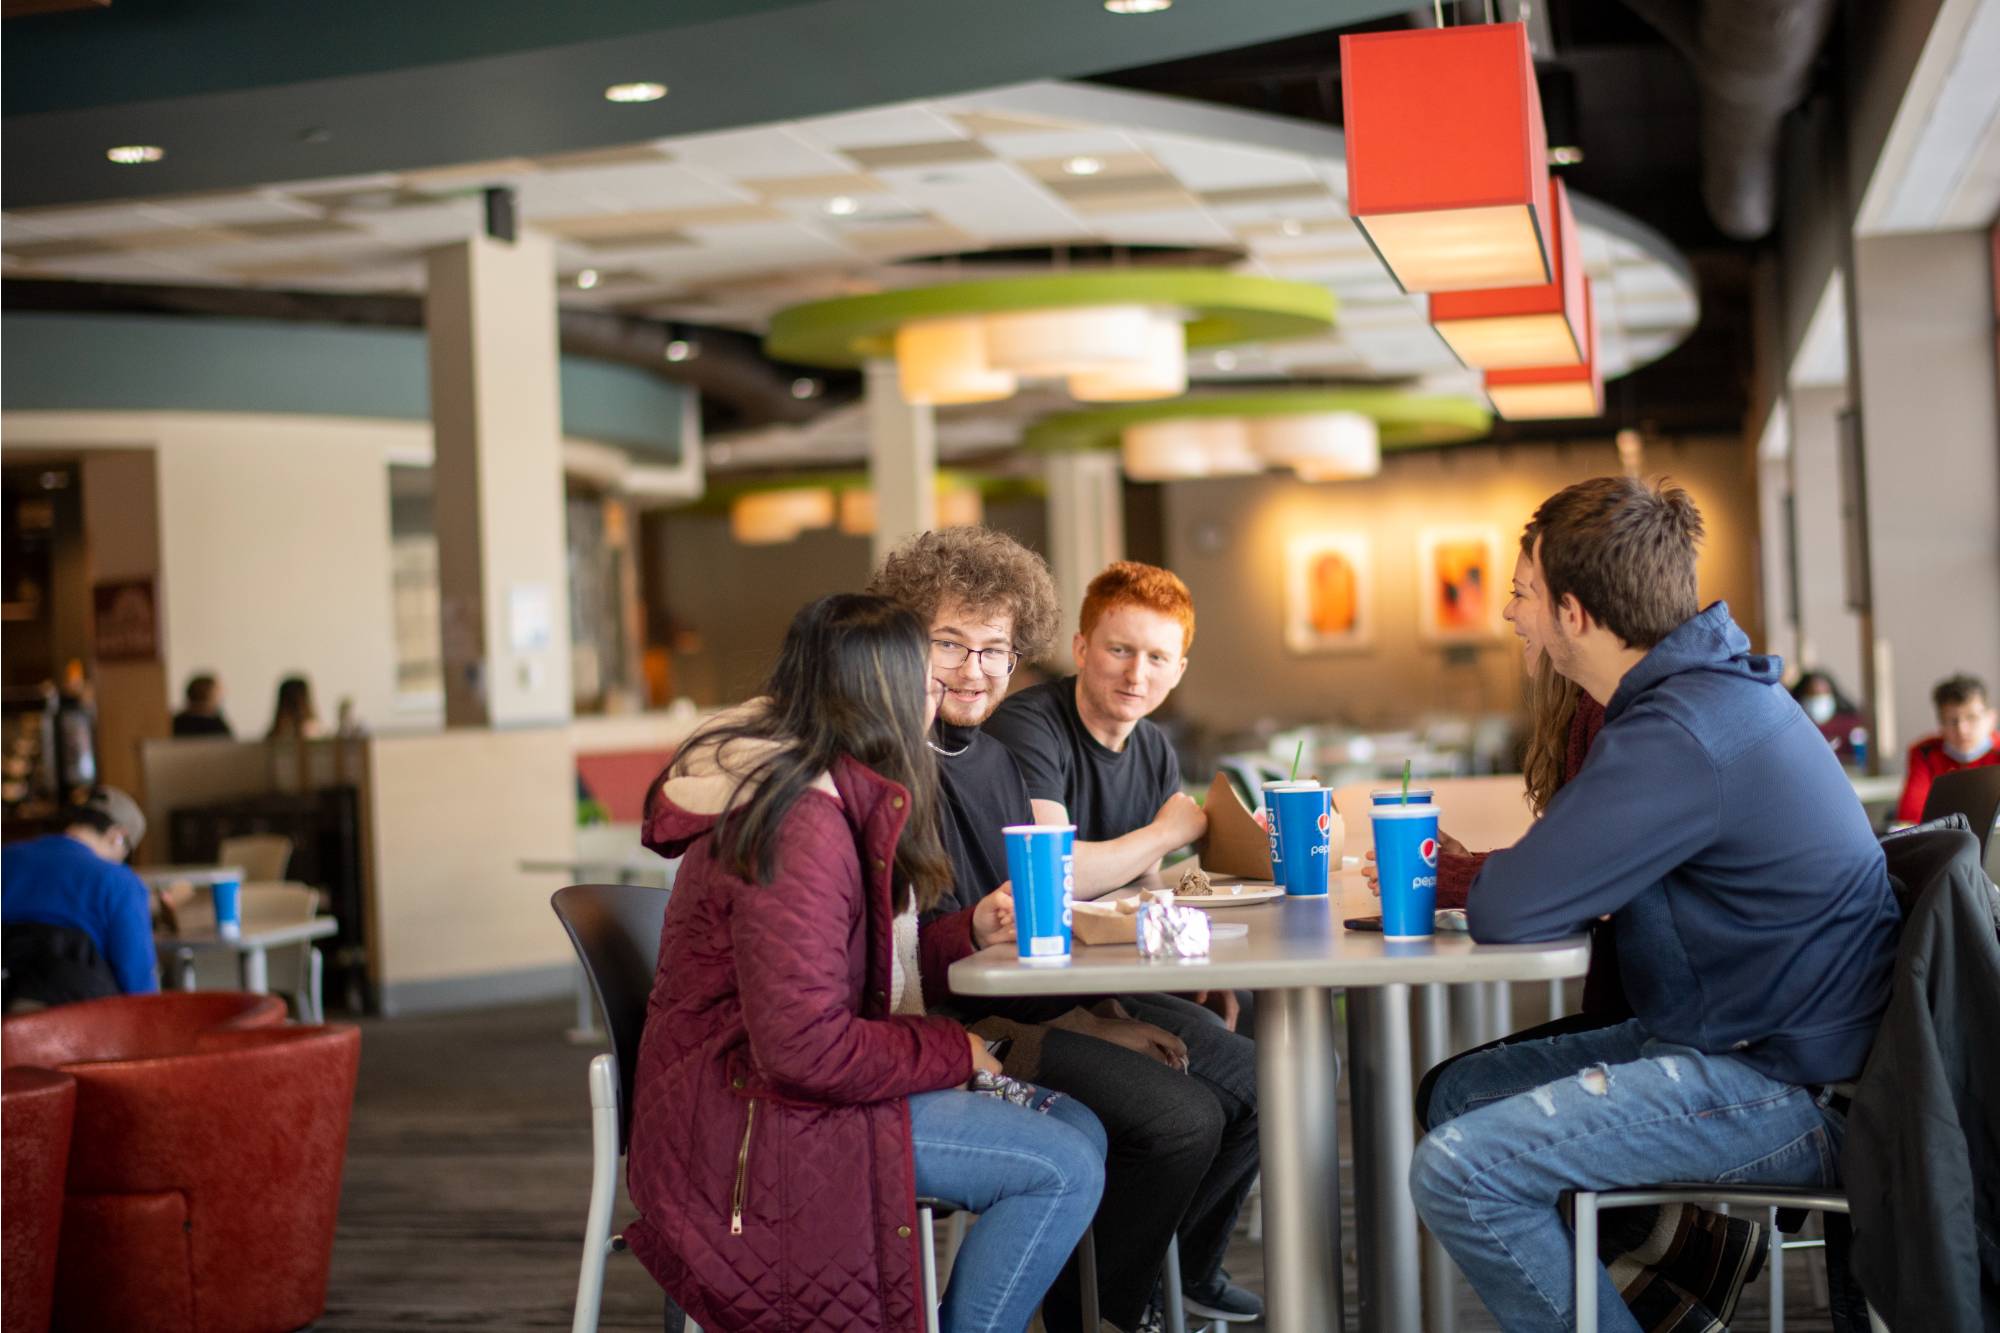 Kleiner Commons is a popular dining location, grocery store, and coffee bar on Grand Valley's North Campus.